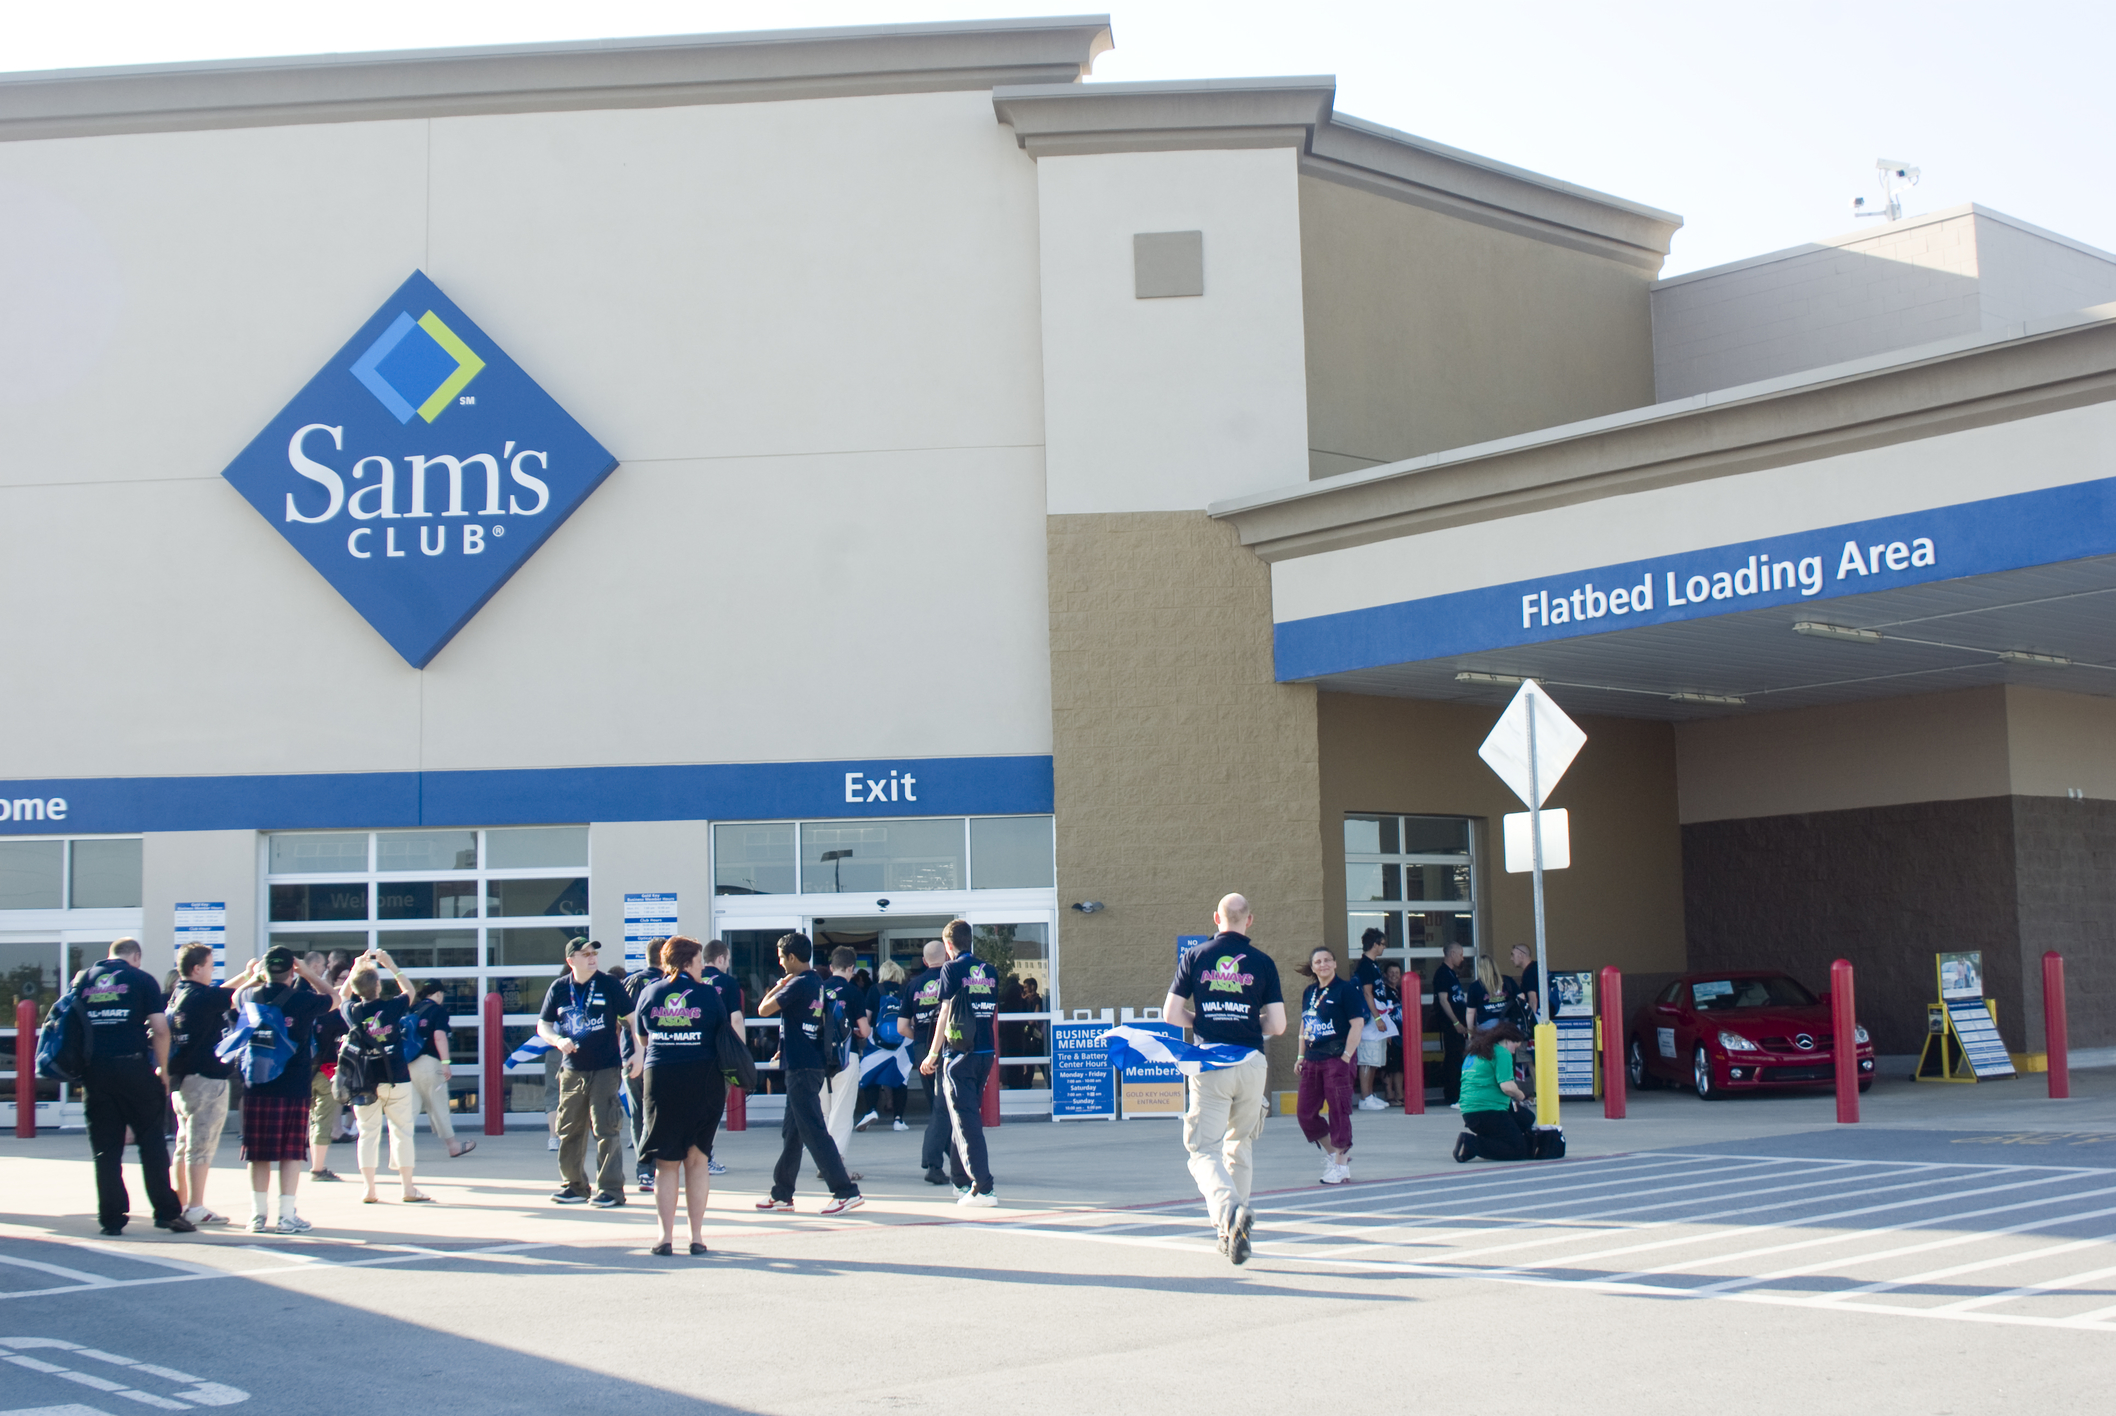 Sam’s Club Memorial Day sale: Here are 10 of the best deals!